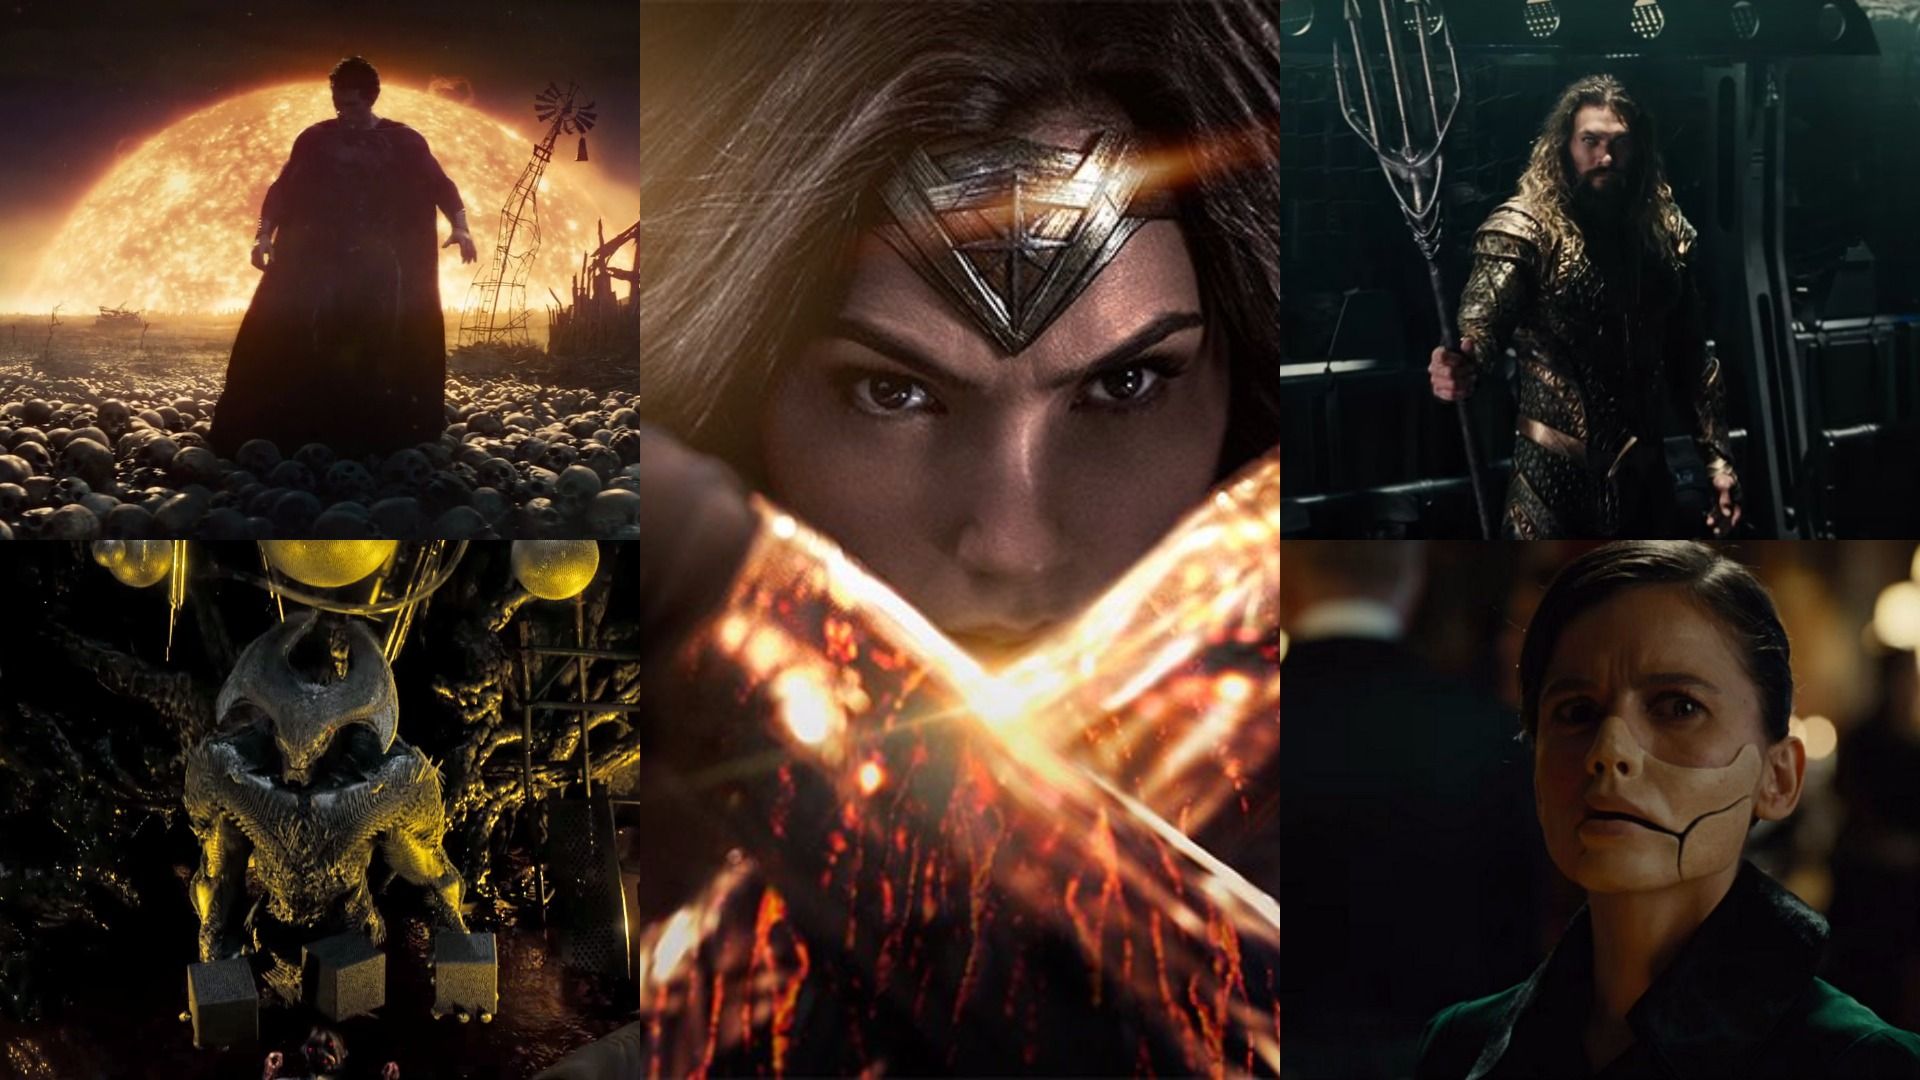 DC Extended Universe Connections in Wonder Woman Superheroes daily dose of Superheroes news